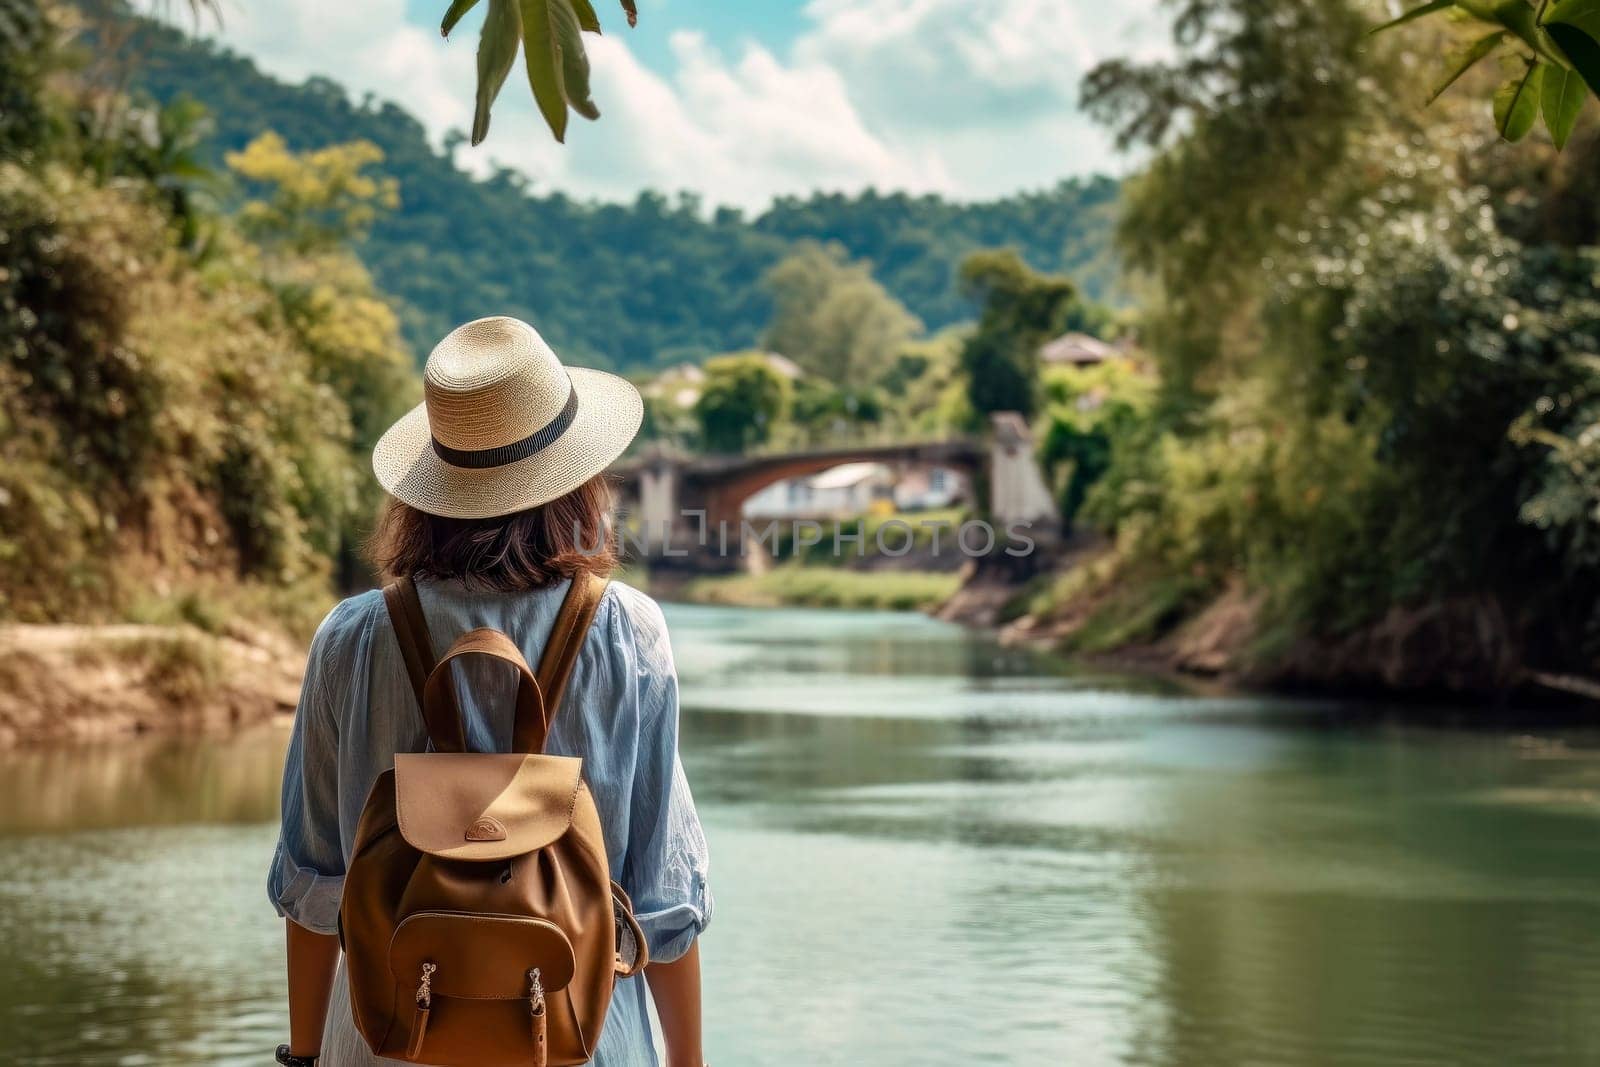 A traveling woman, with backpack and straw hat, gazes at a scenic river in a lush tropical setting.